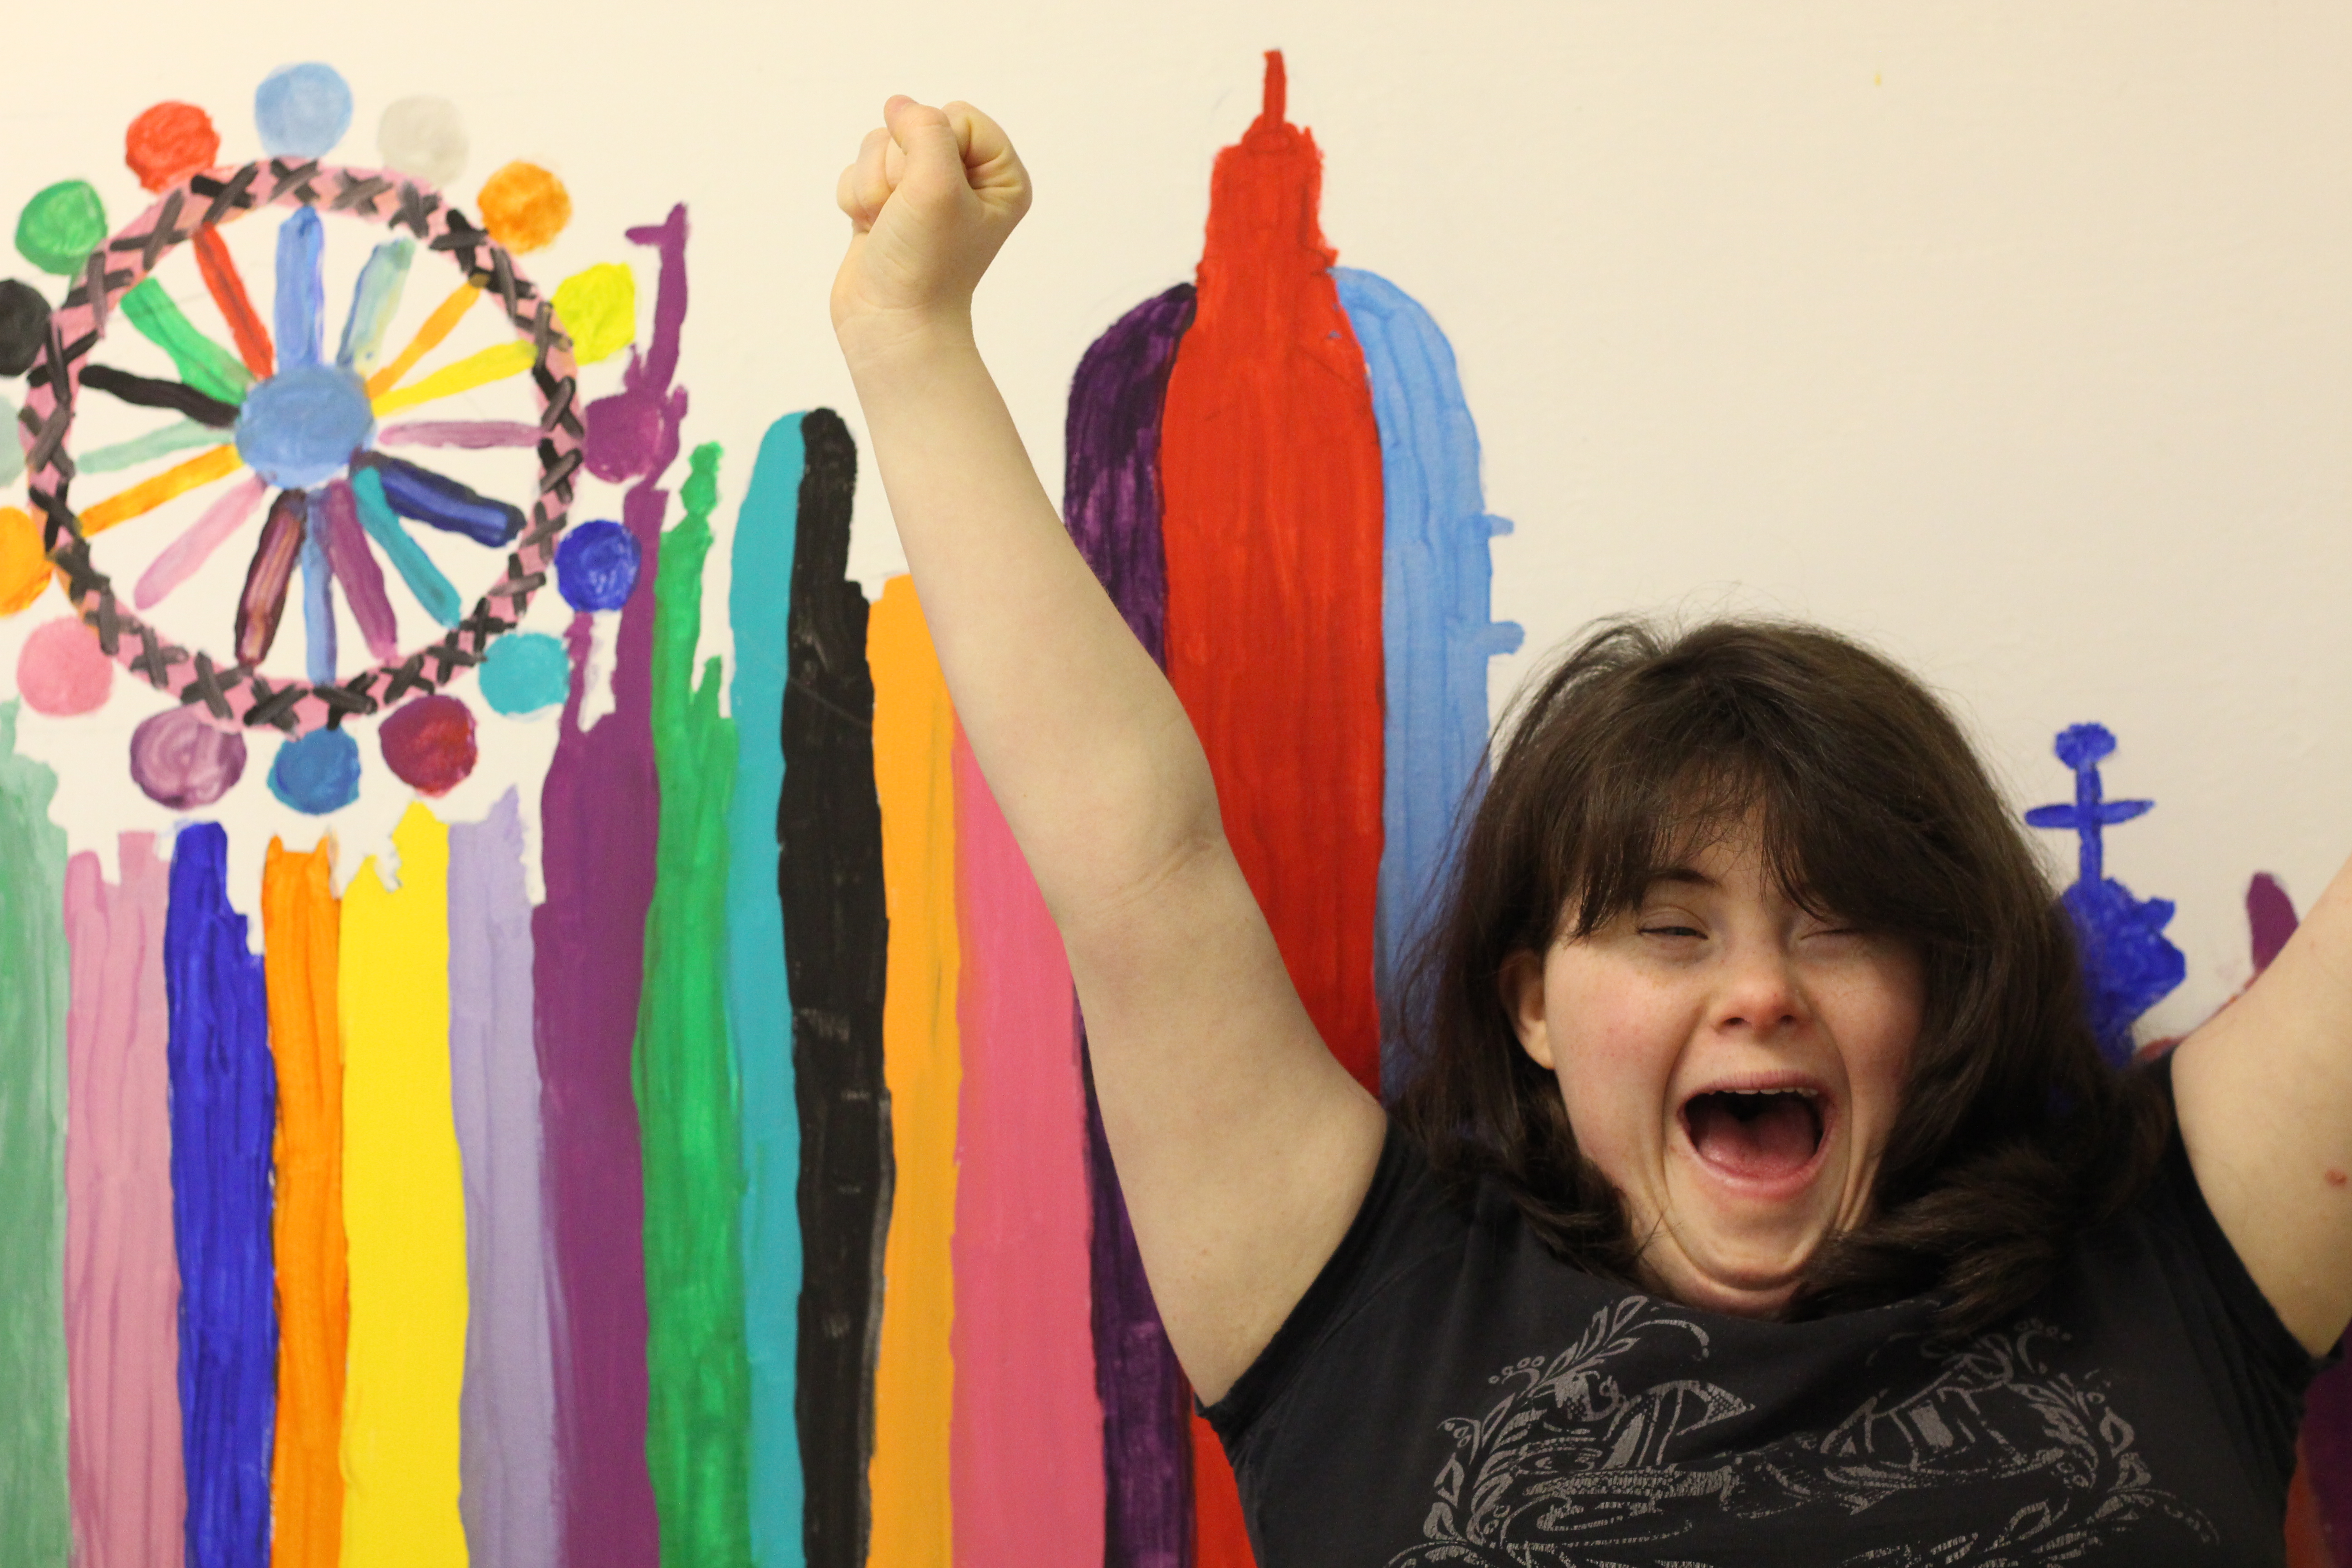 Annalie, our student with Down's syndrome, celebrates